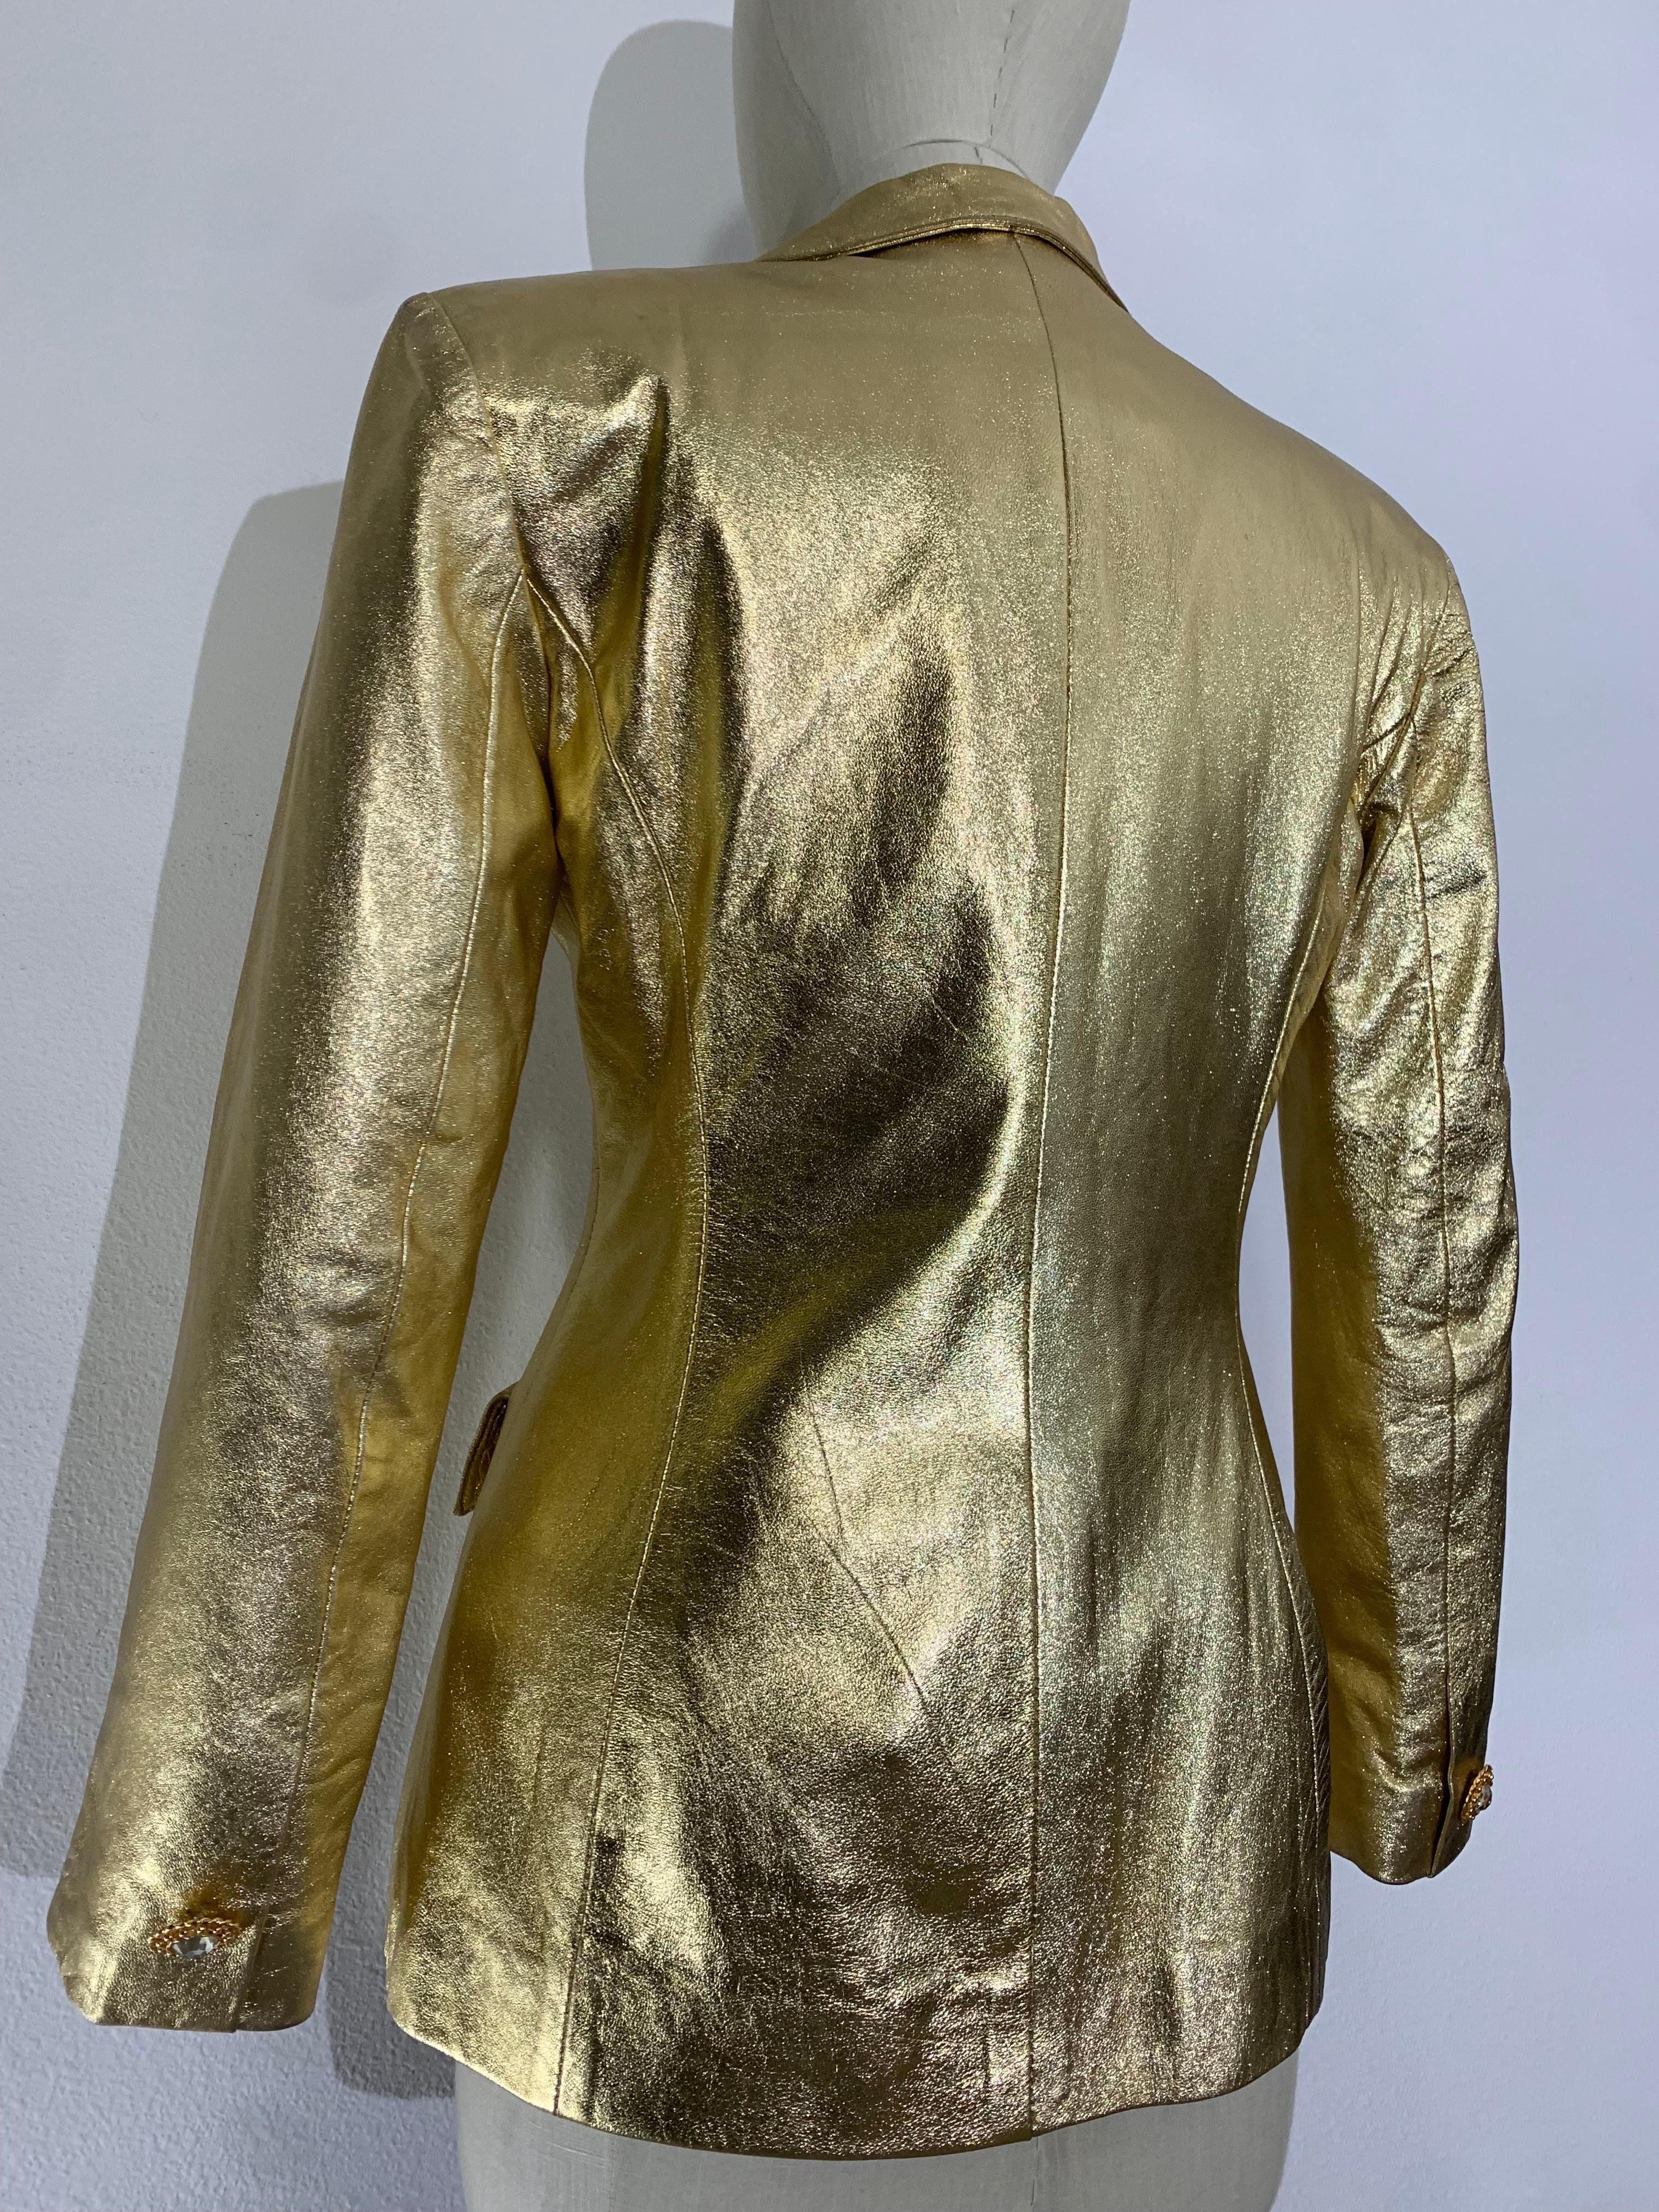 1980s Lillie Rubin 2-Piece Gold Metallic Lambskin Leather Vest & Jacket Ensemble In Excellent Condition For Sale In Gresham, OR